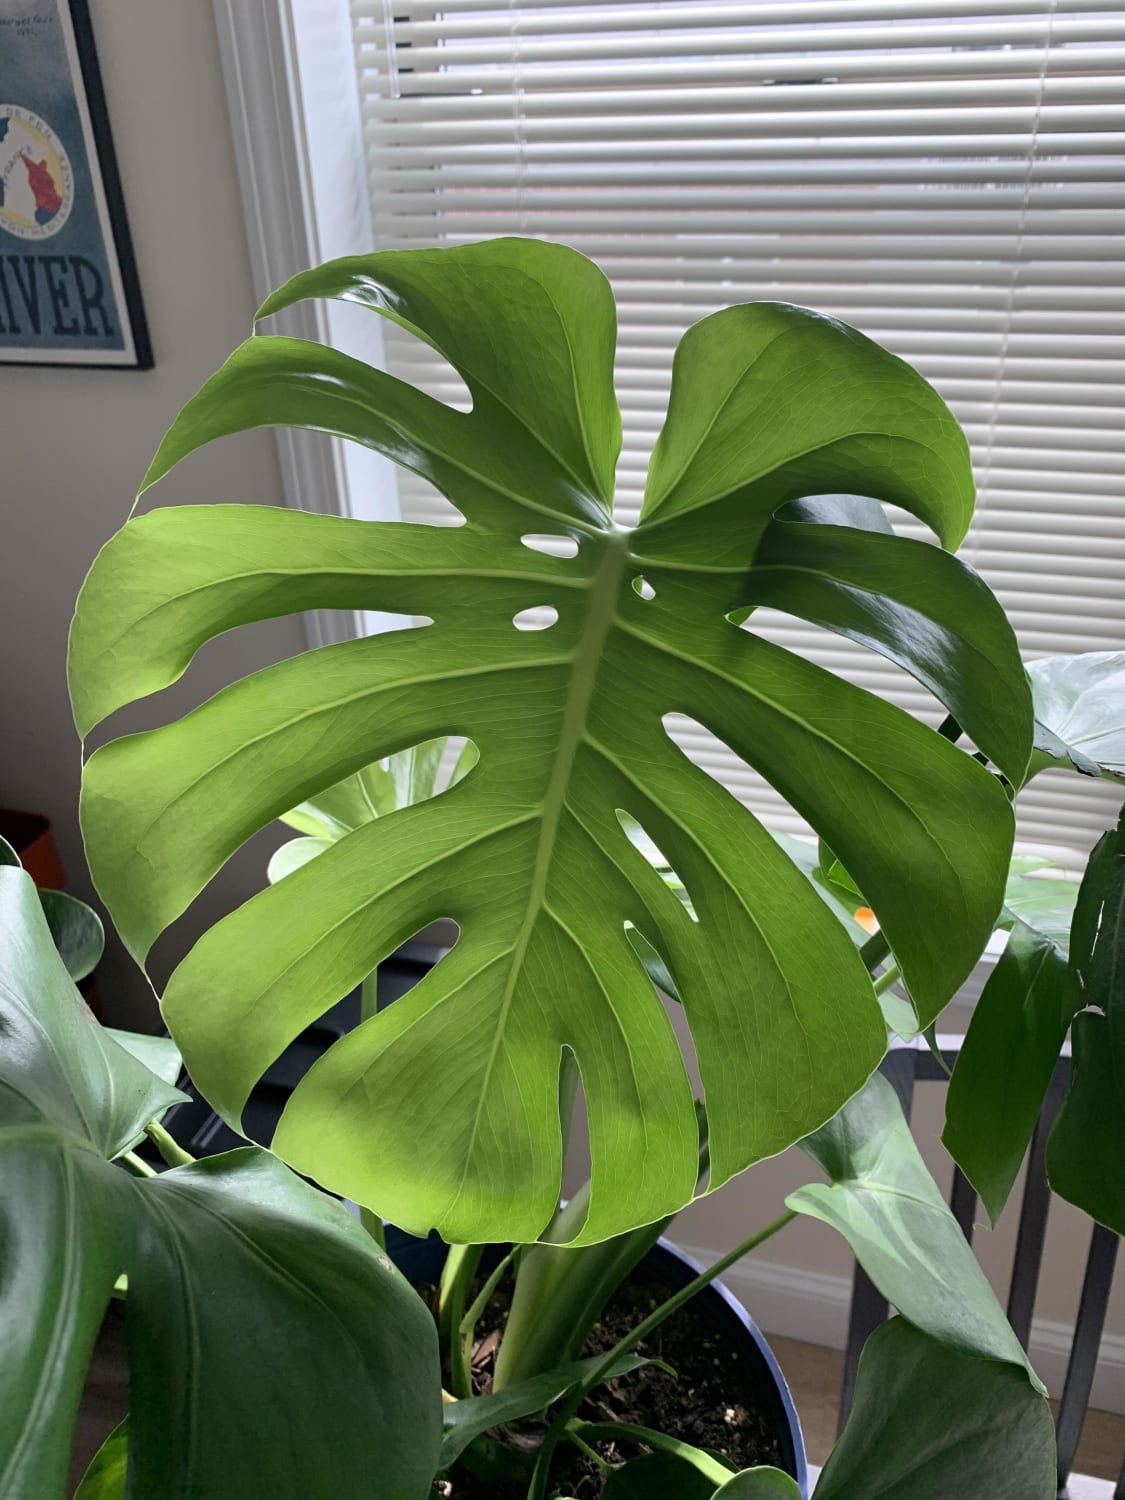 New Monstera Leaf! I’ve never owned anything more than those little succulents so seeing this plant happy and healthy makes me smile.